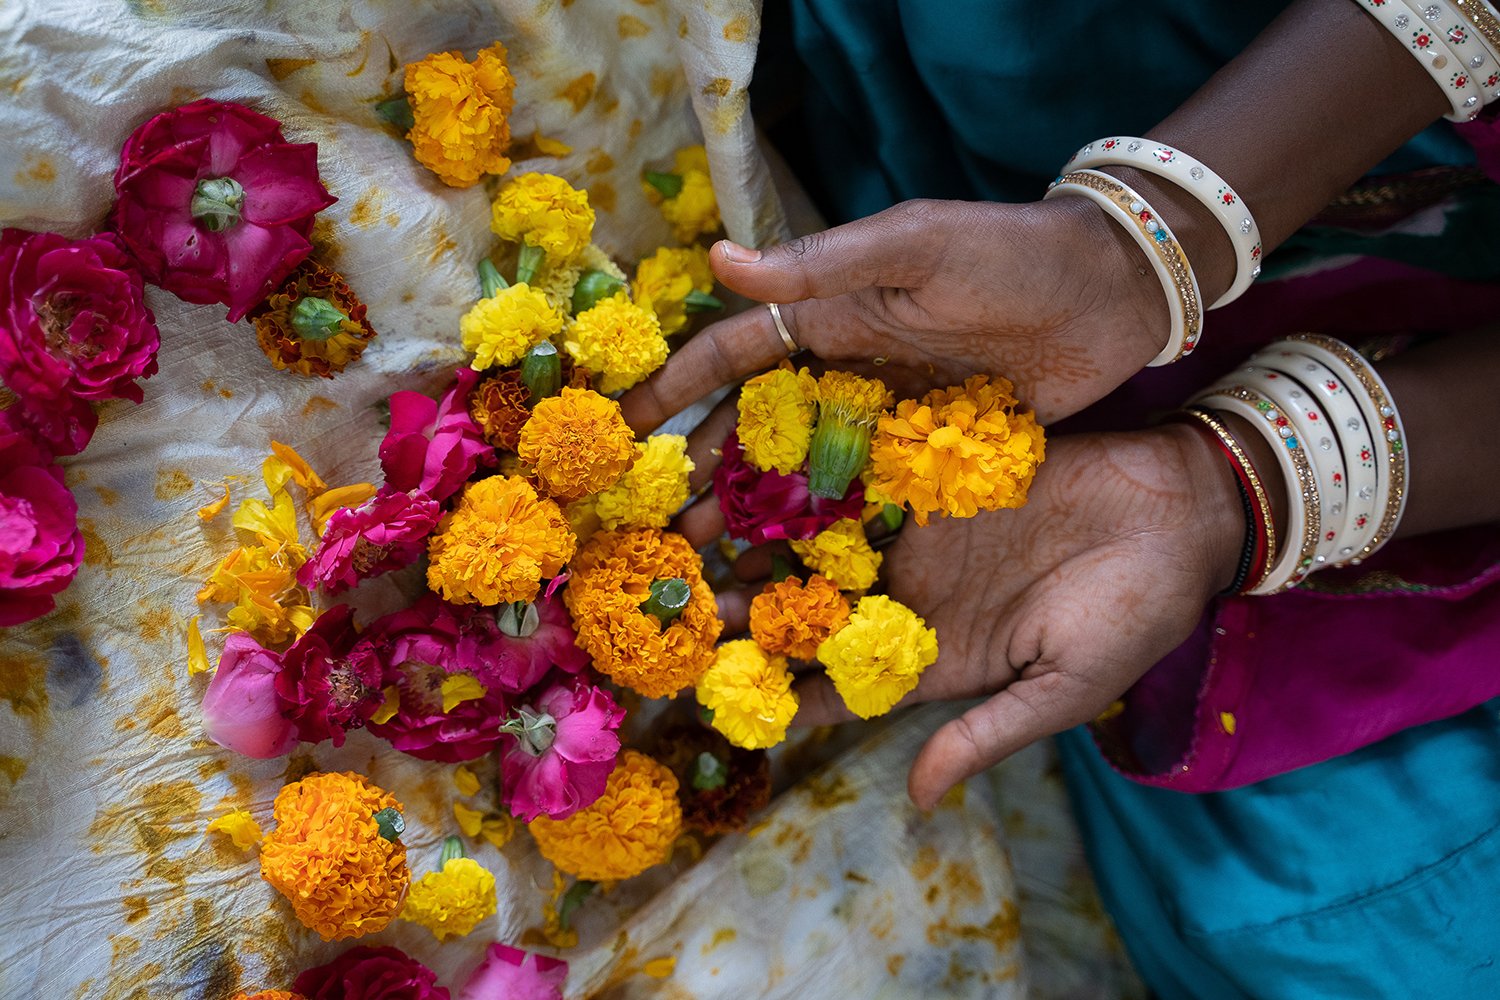 Gathering local temple flowers at the Saheli centre in Bhimakhor, Rajasthan (Image by Jack Howard)